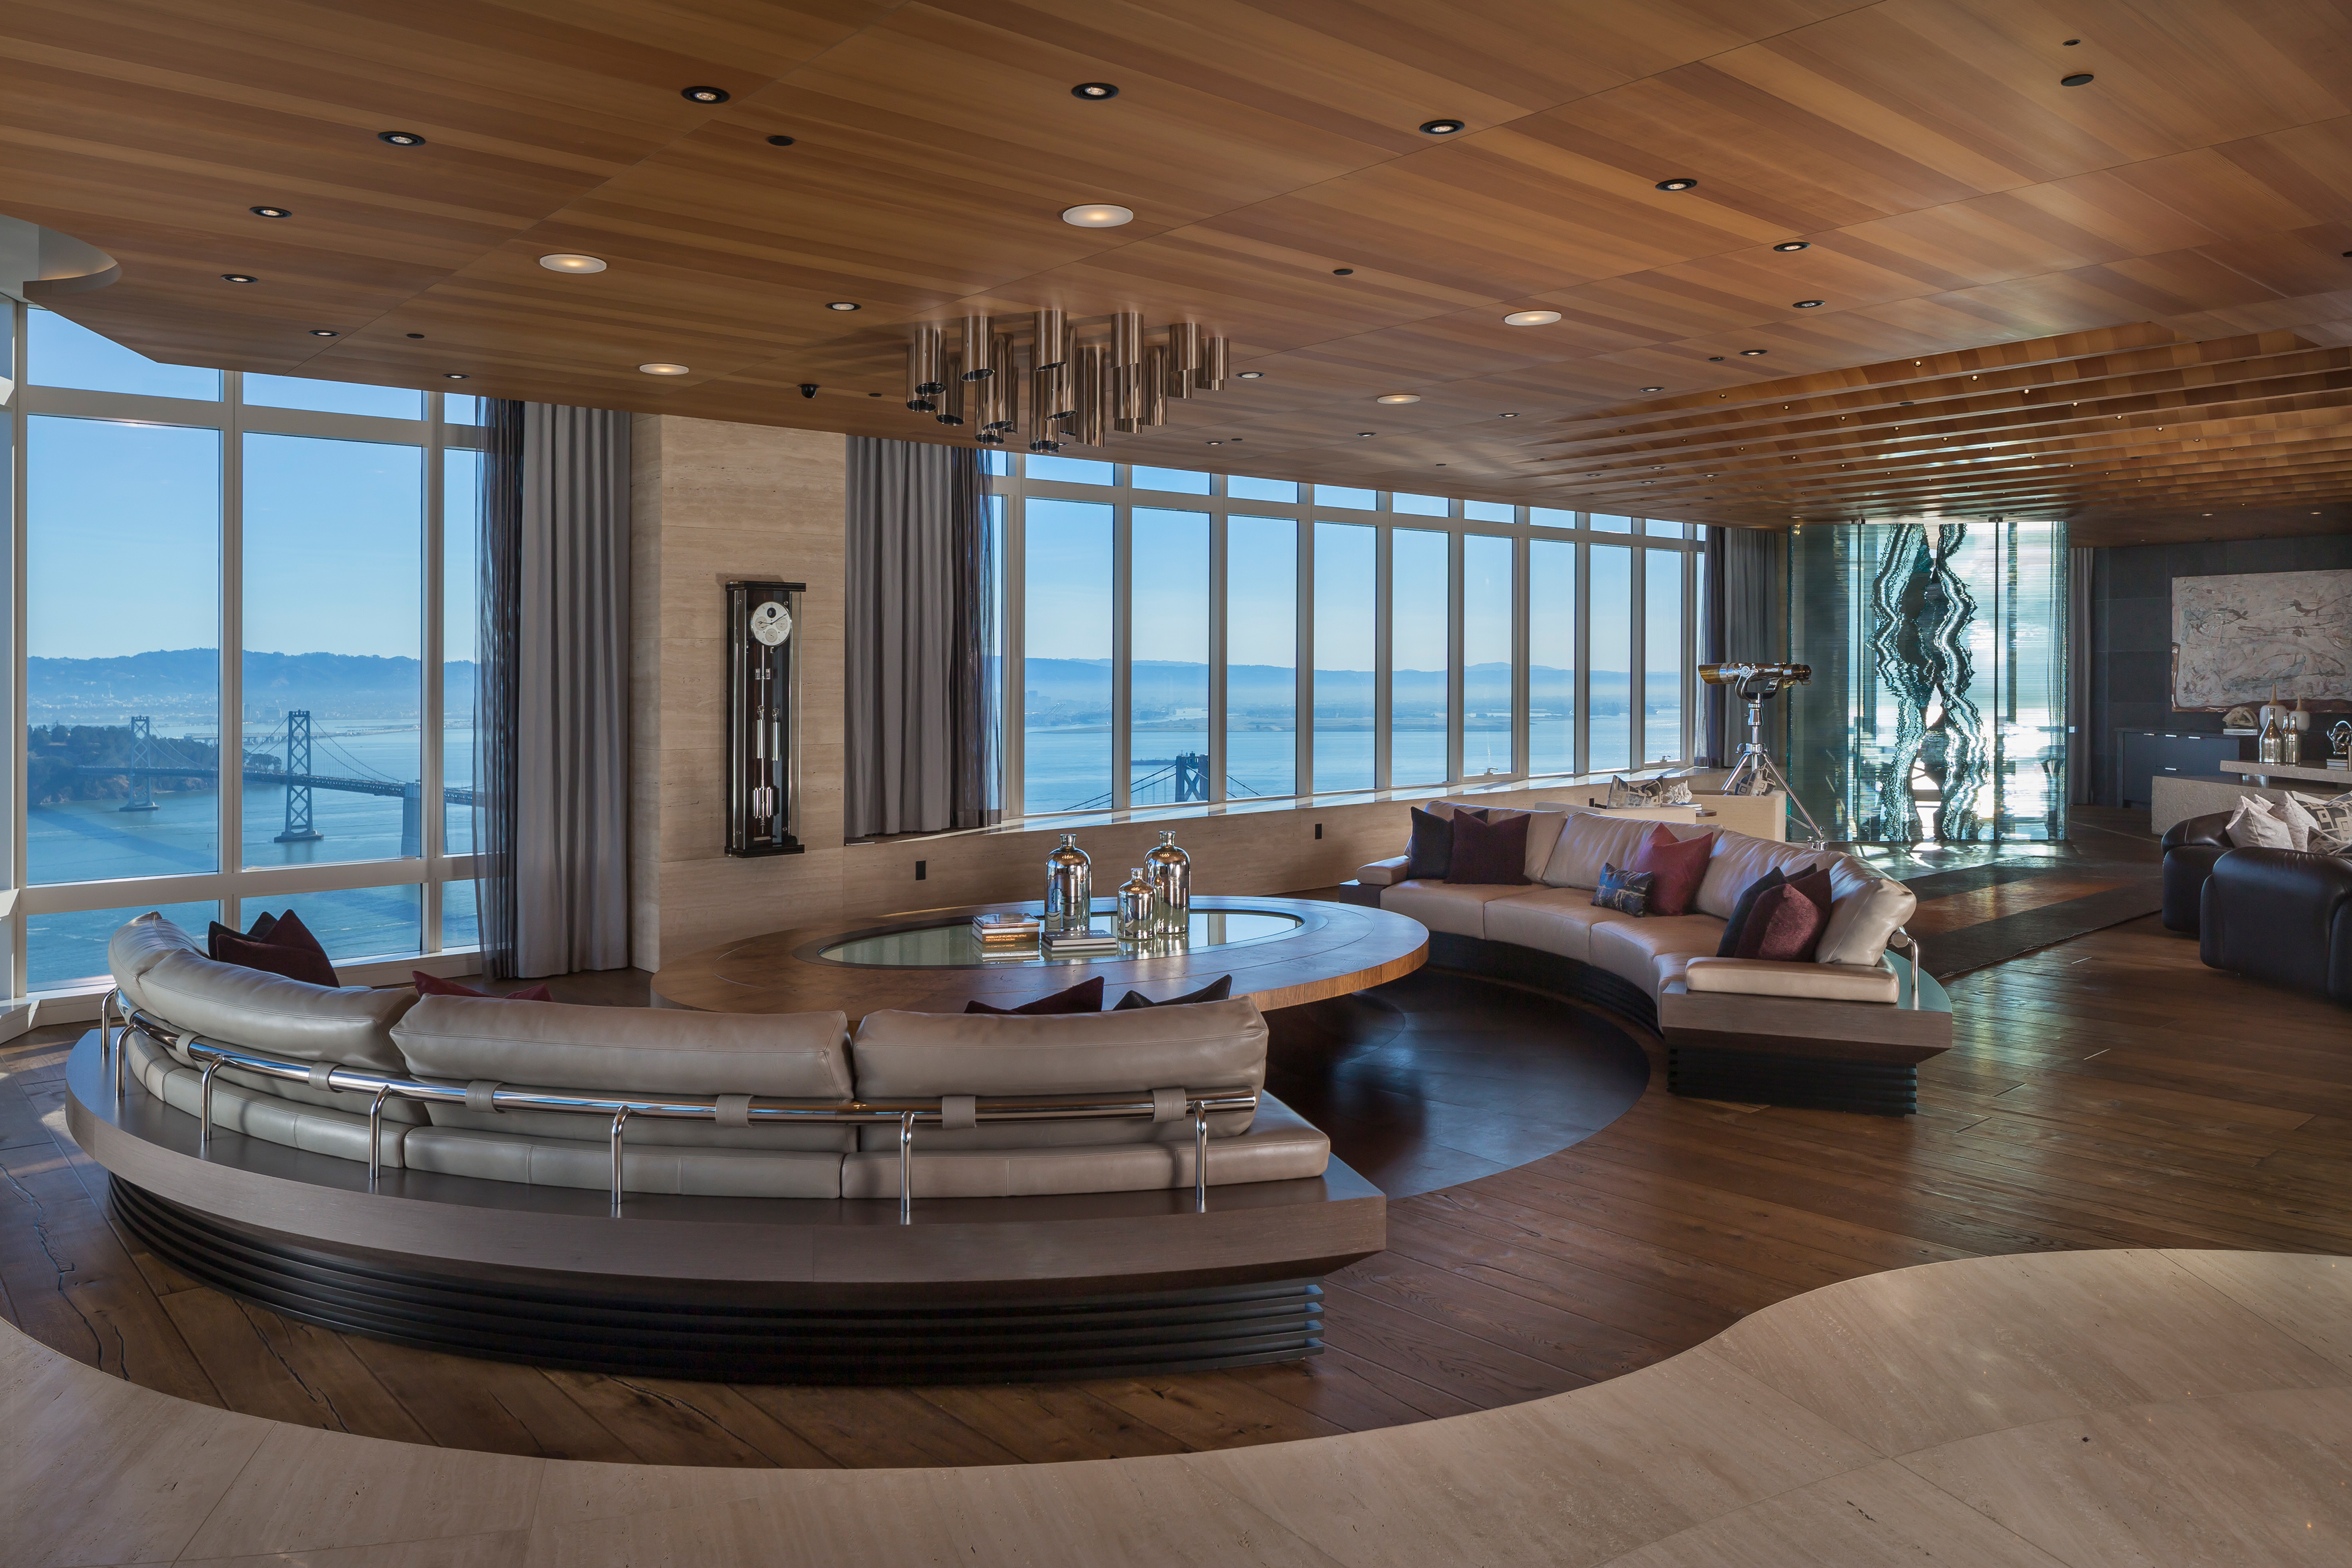 California's Highest and Largest Penthouse